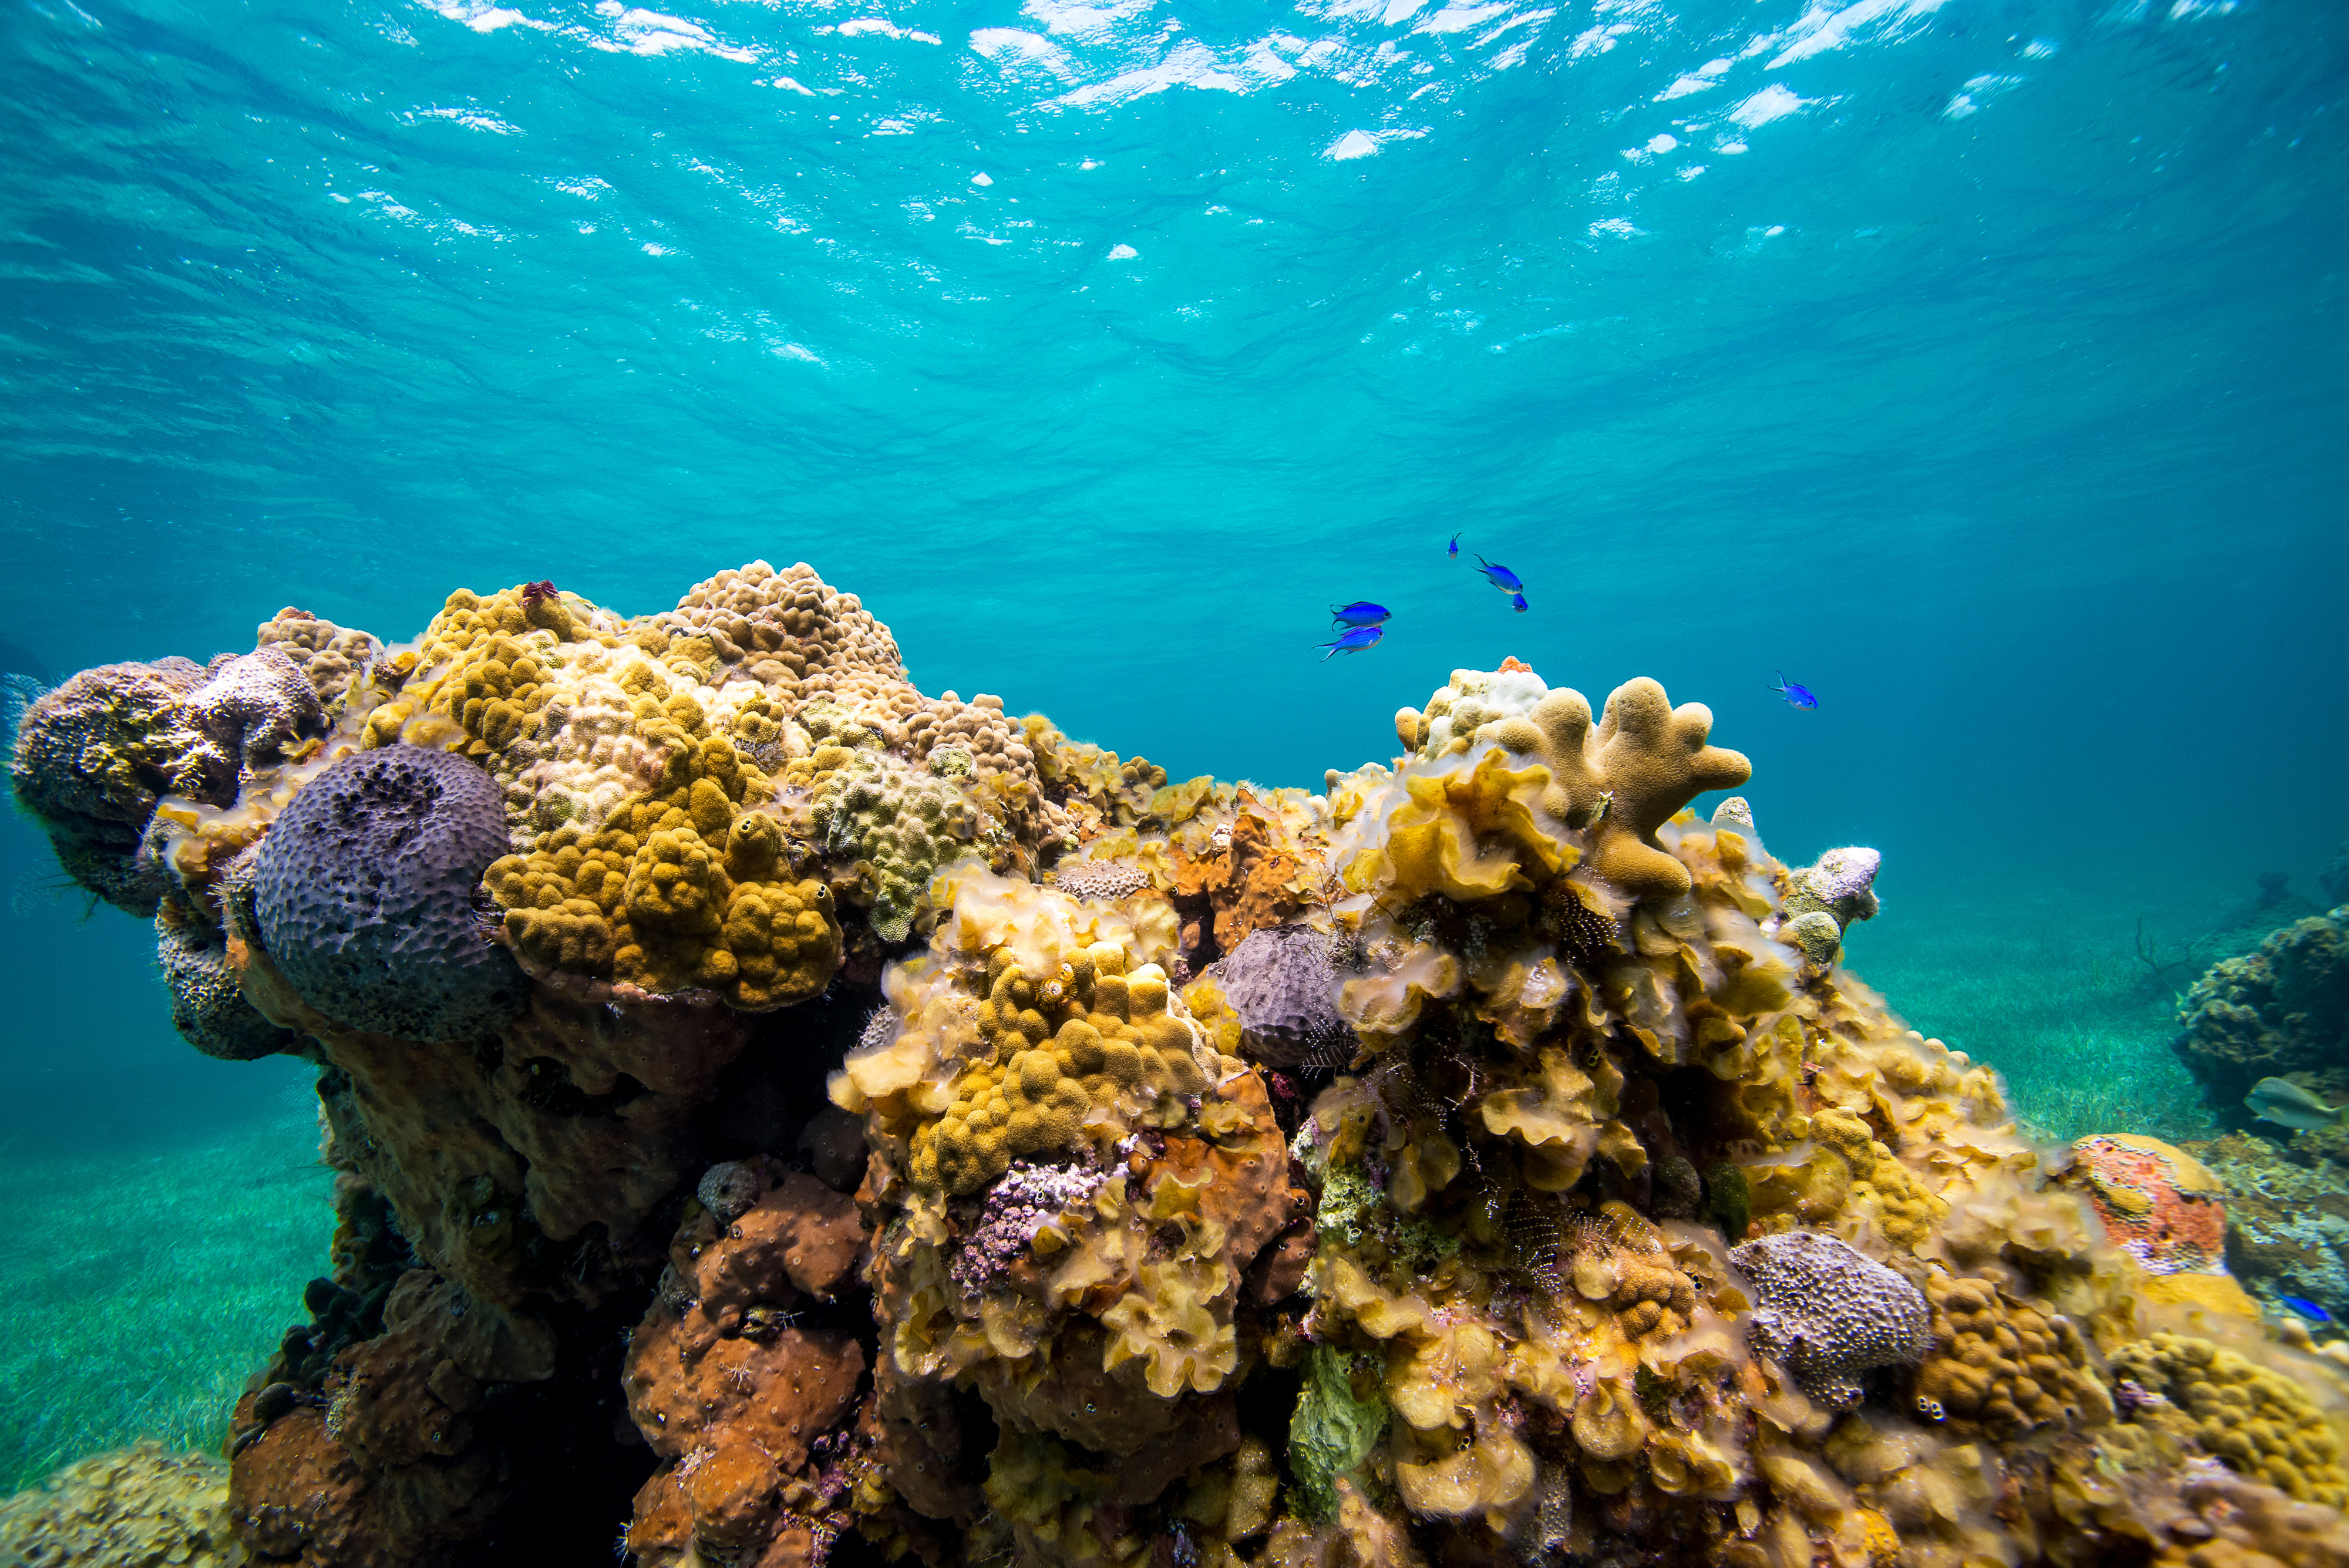 Small blue fish swim over a reef covered in multi-colored corals, surrounded by turquoise ocean waters.